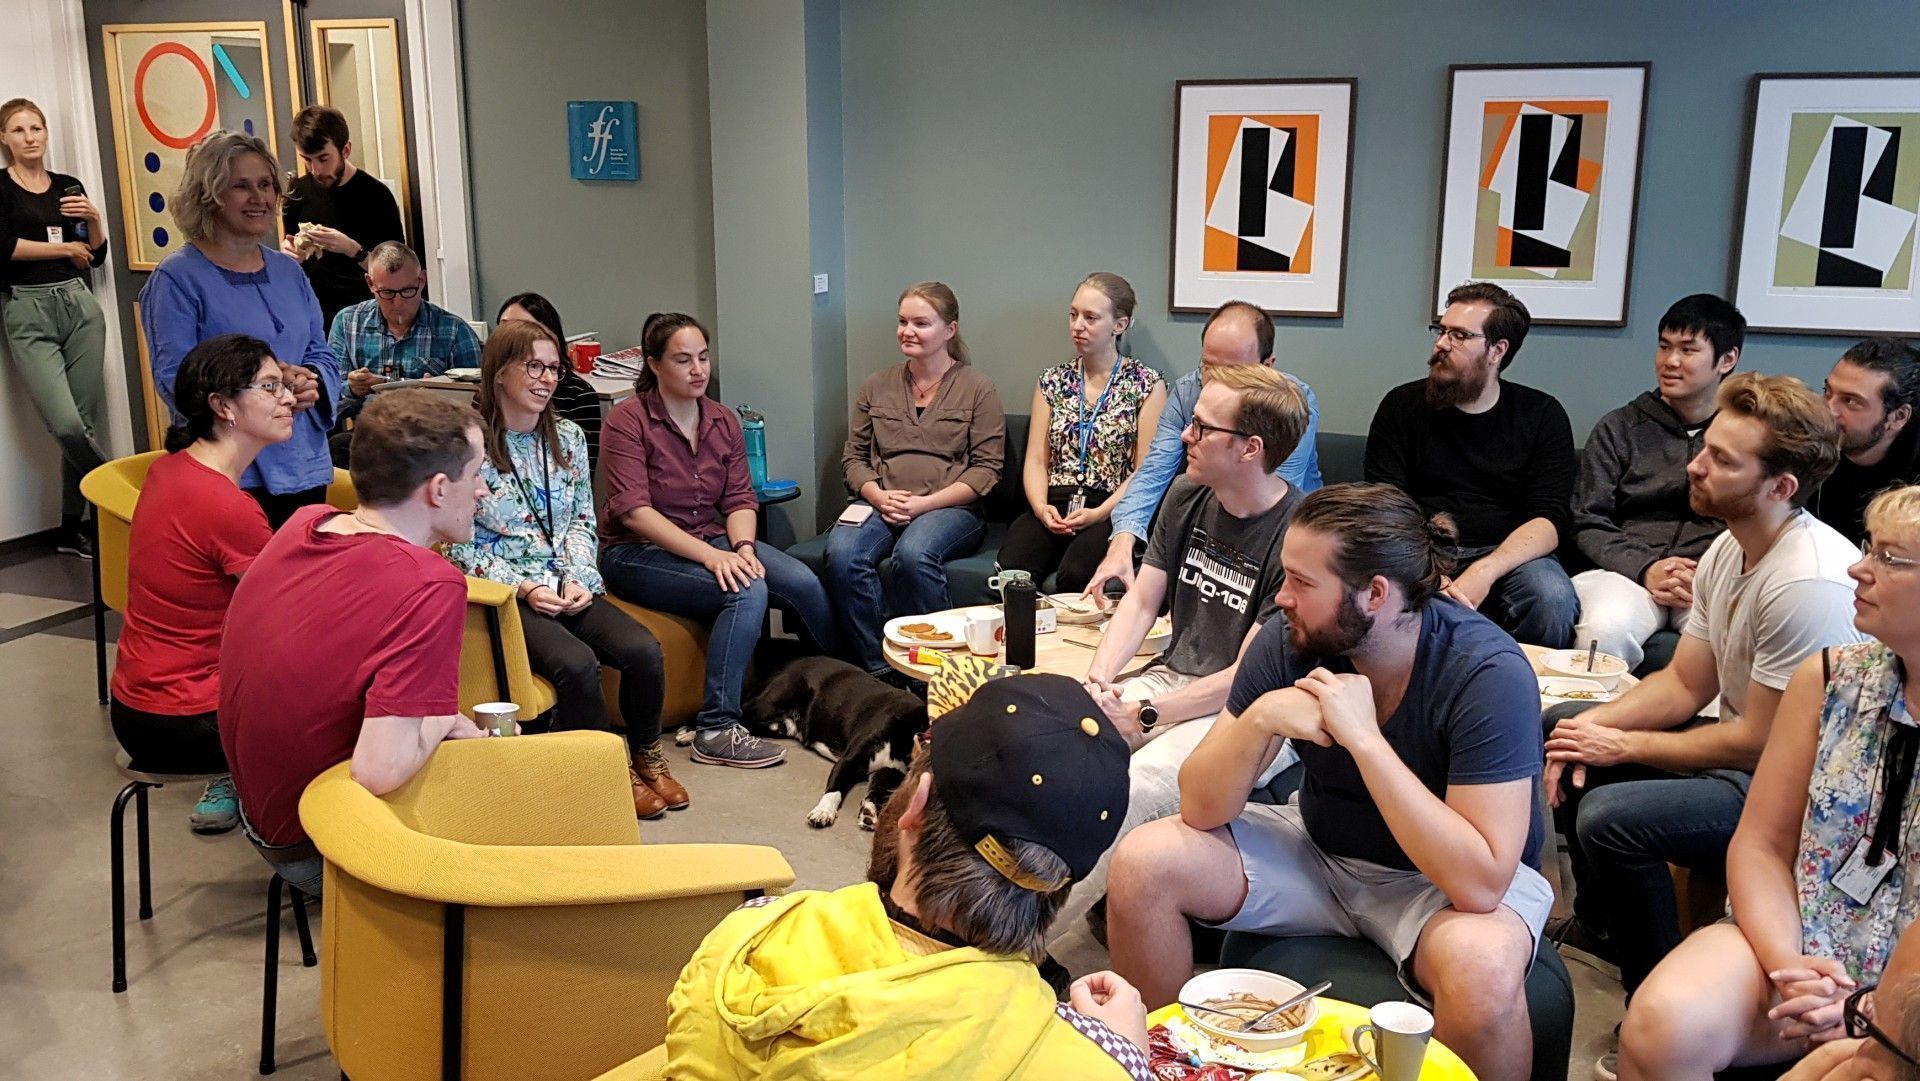 Every Wednesday everyone meets up for RITMO lunch. The 15-minute &quot;administrative corner&quot; is an important information channel about what is going on. The lunch is also a good time to catch up with RITMO colleagues. You have to show up early to get a seat!